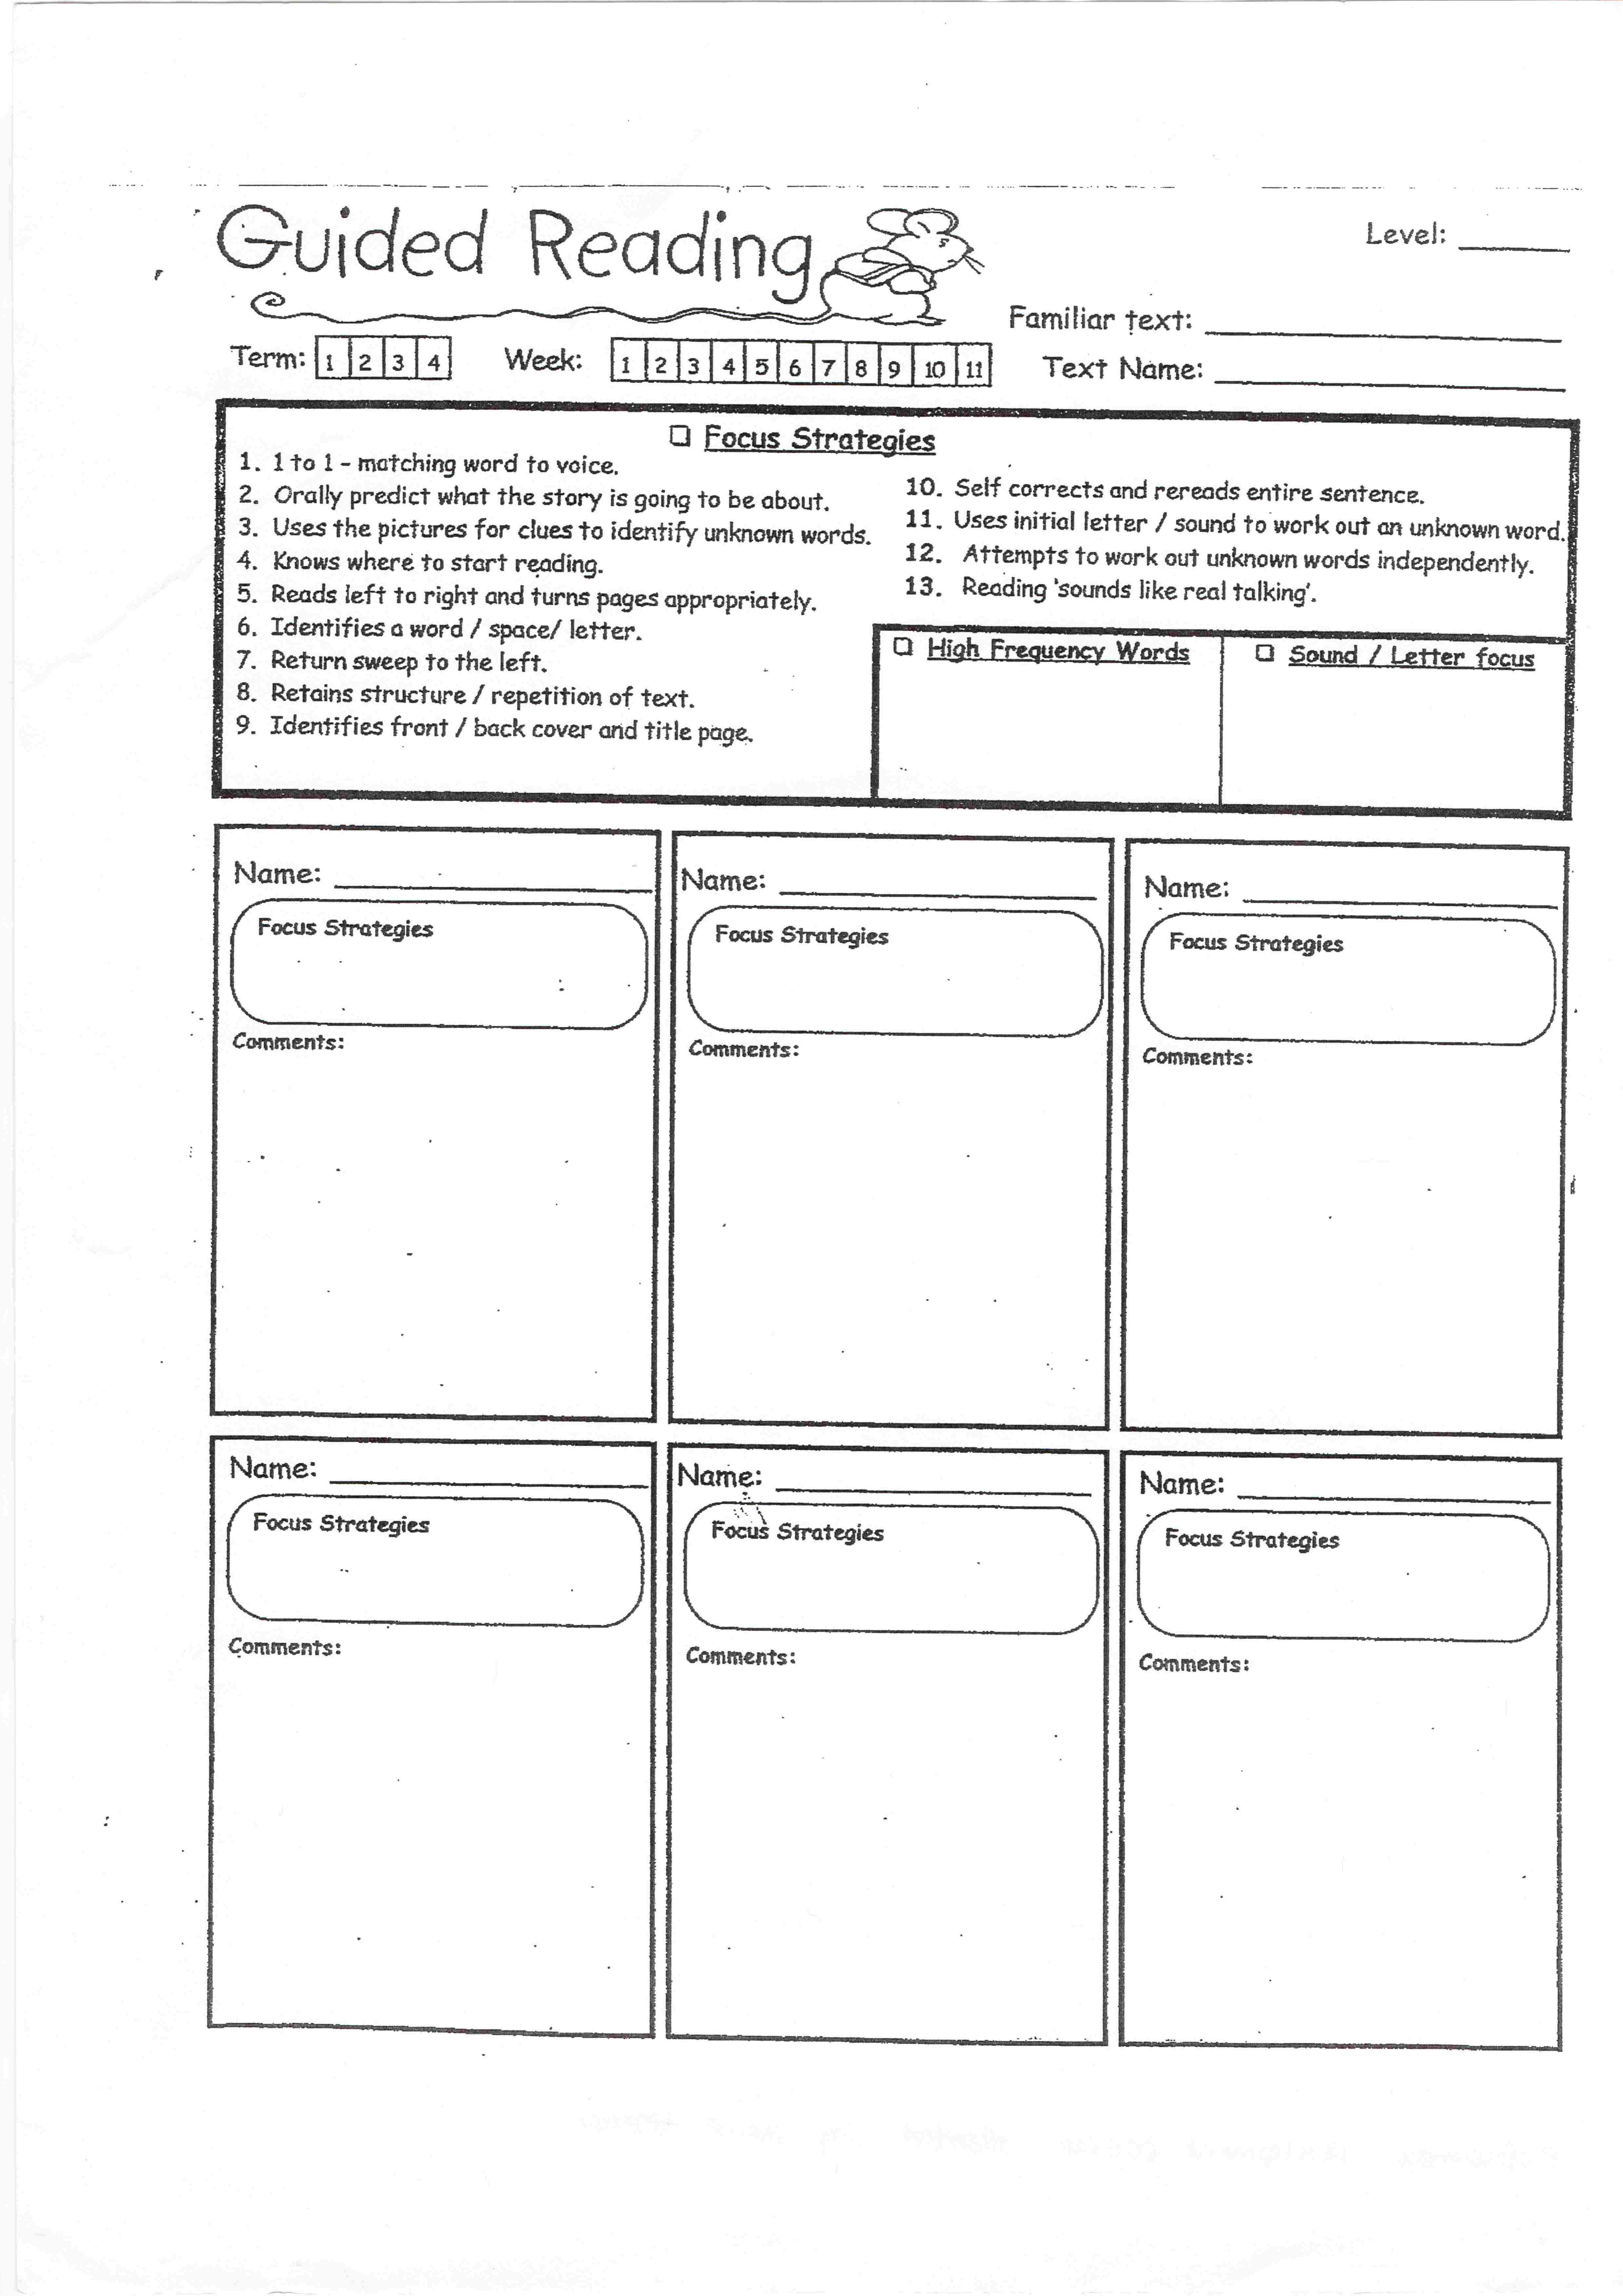 23.23.23 Record keeping - Teaching ePortfolio Rose Moore Within Teacher Anecdotal Notes Template